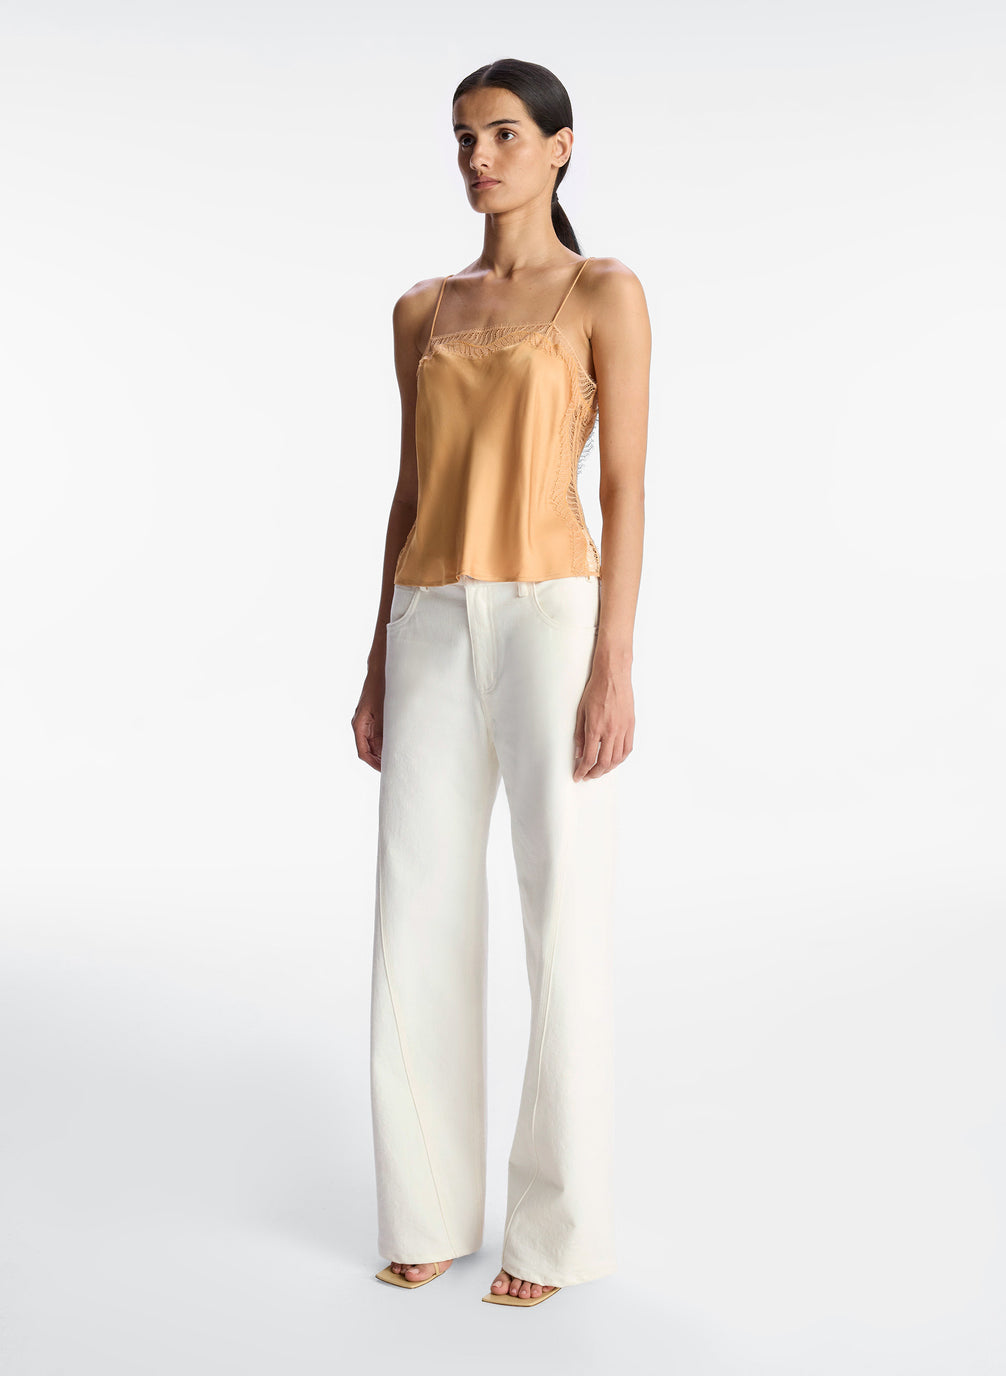 side view of woman wearing tan lace trim camisole and white pants